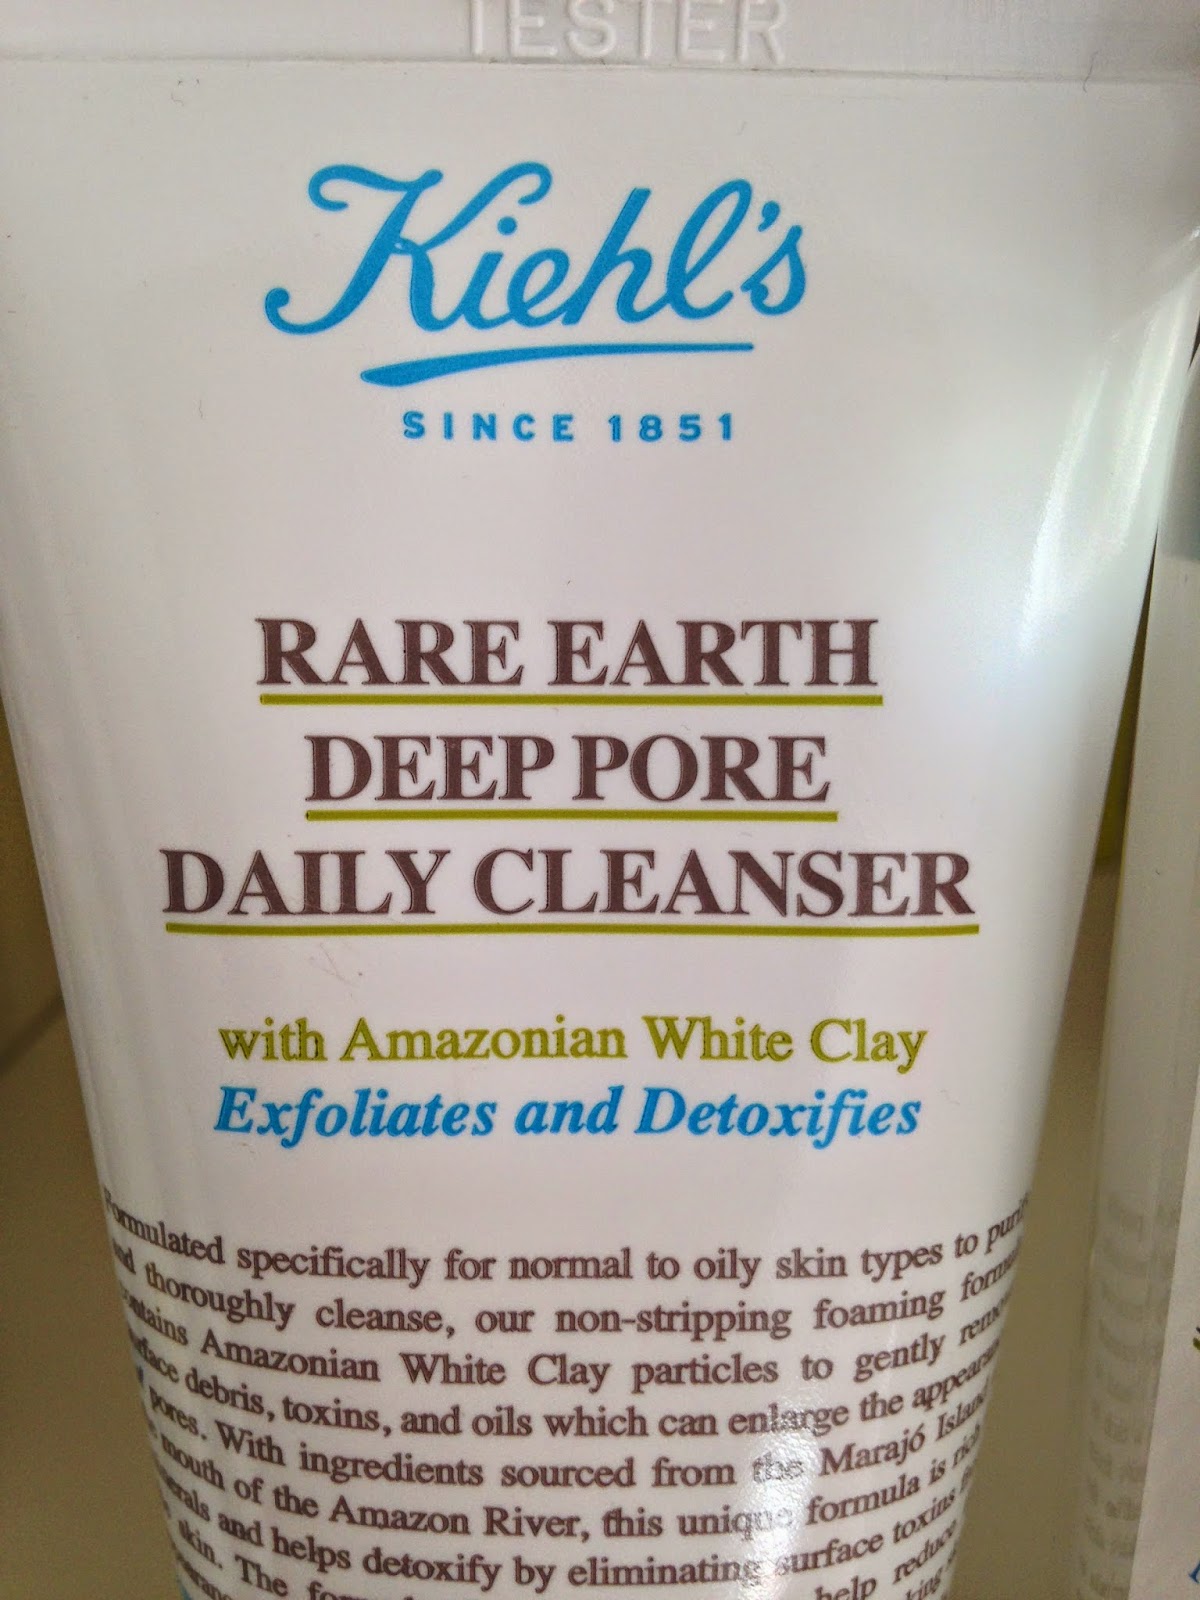 Kiehl's Rare Earth review